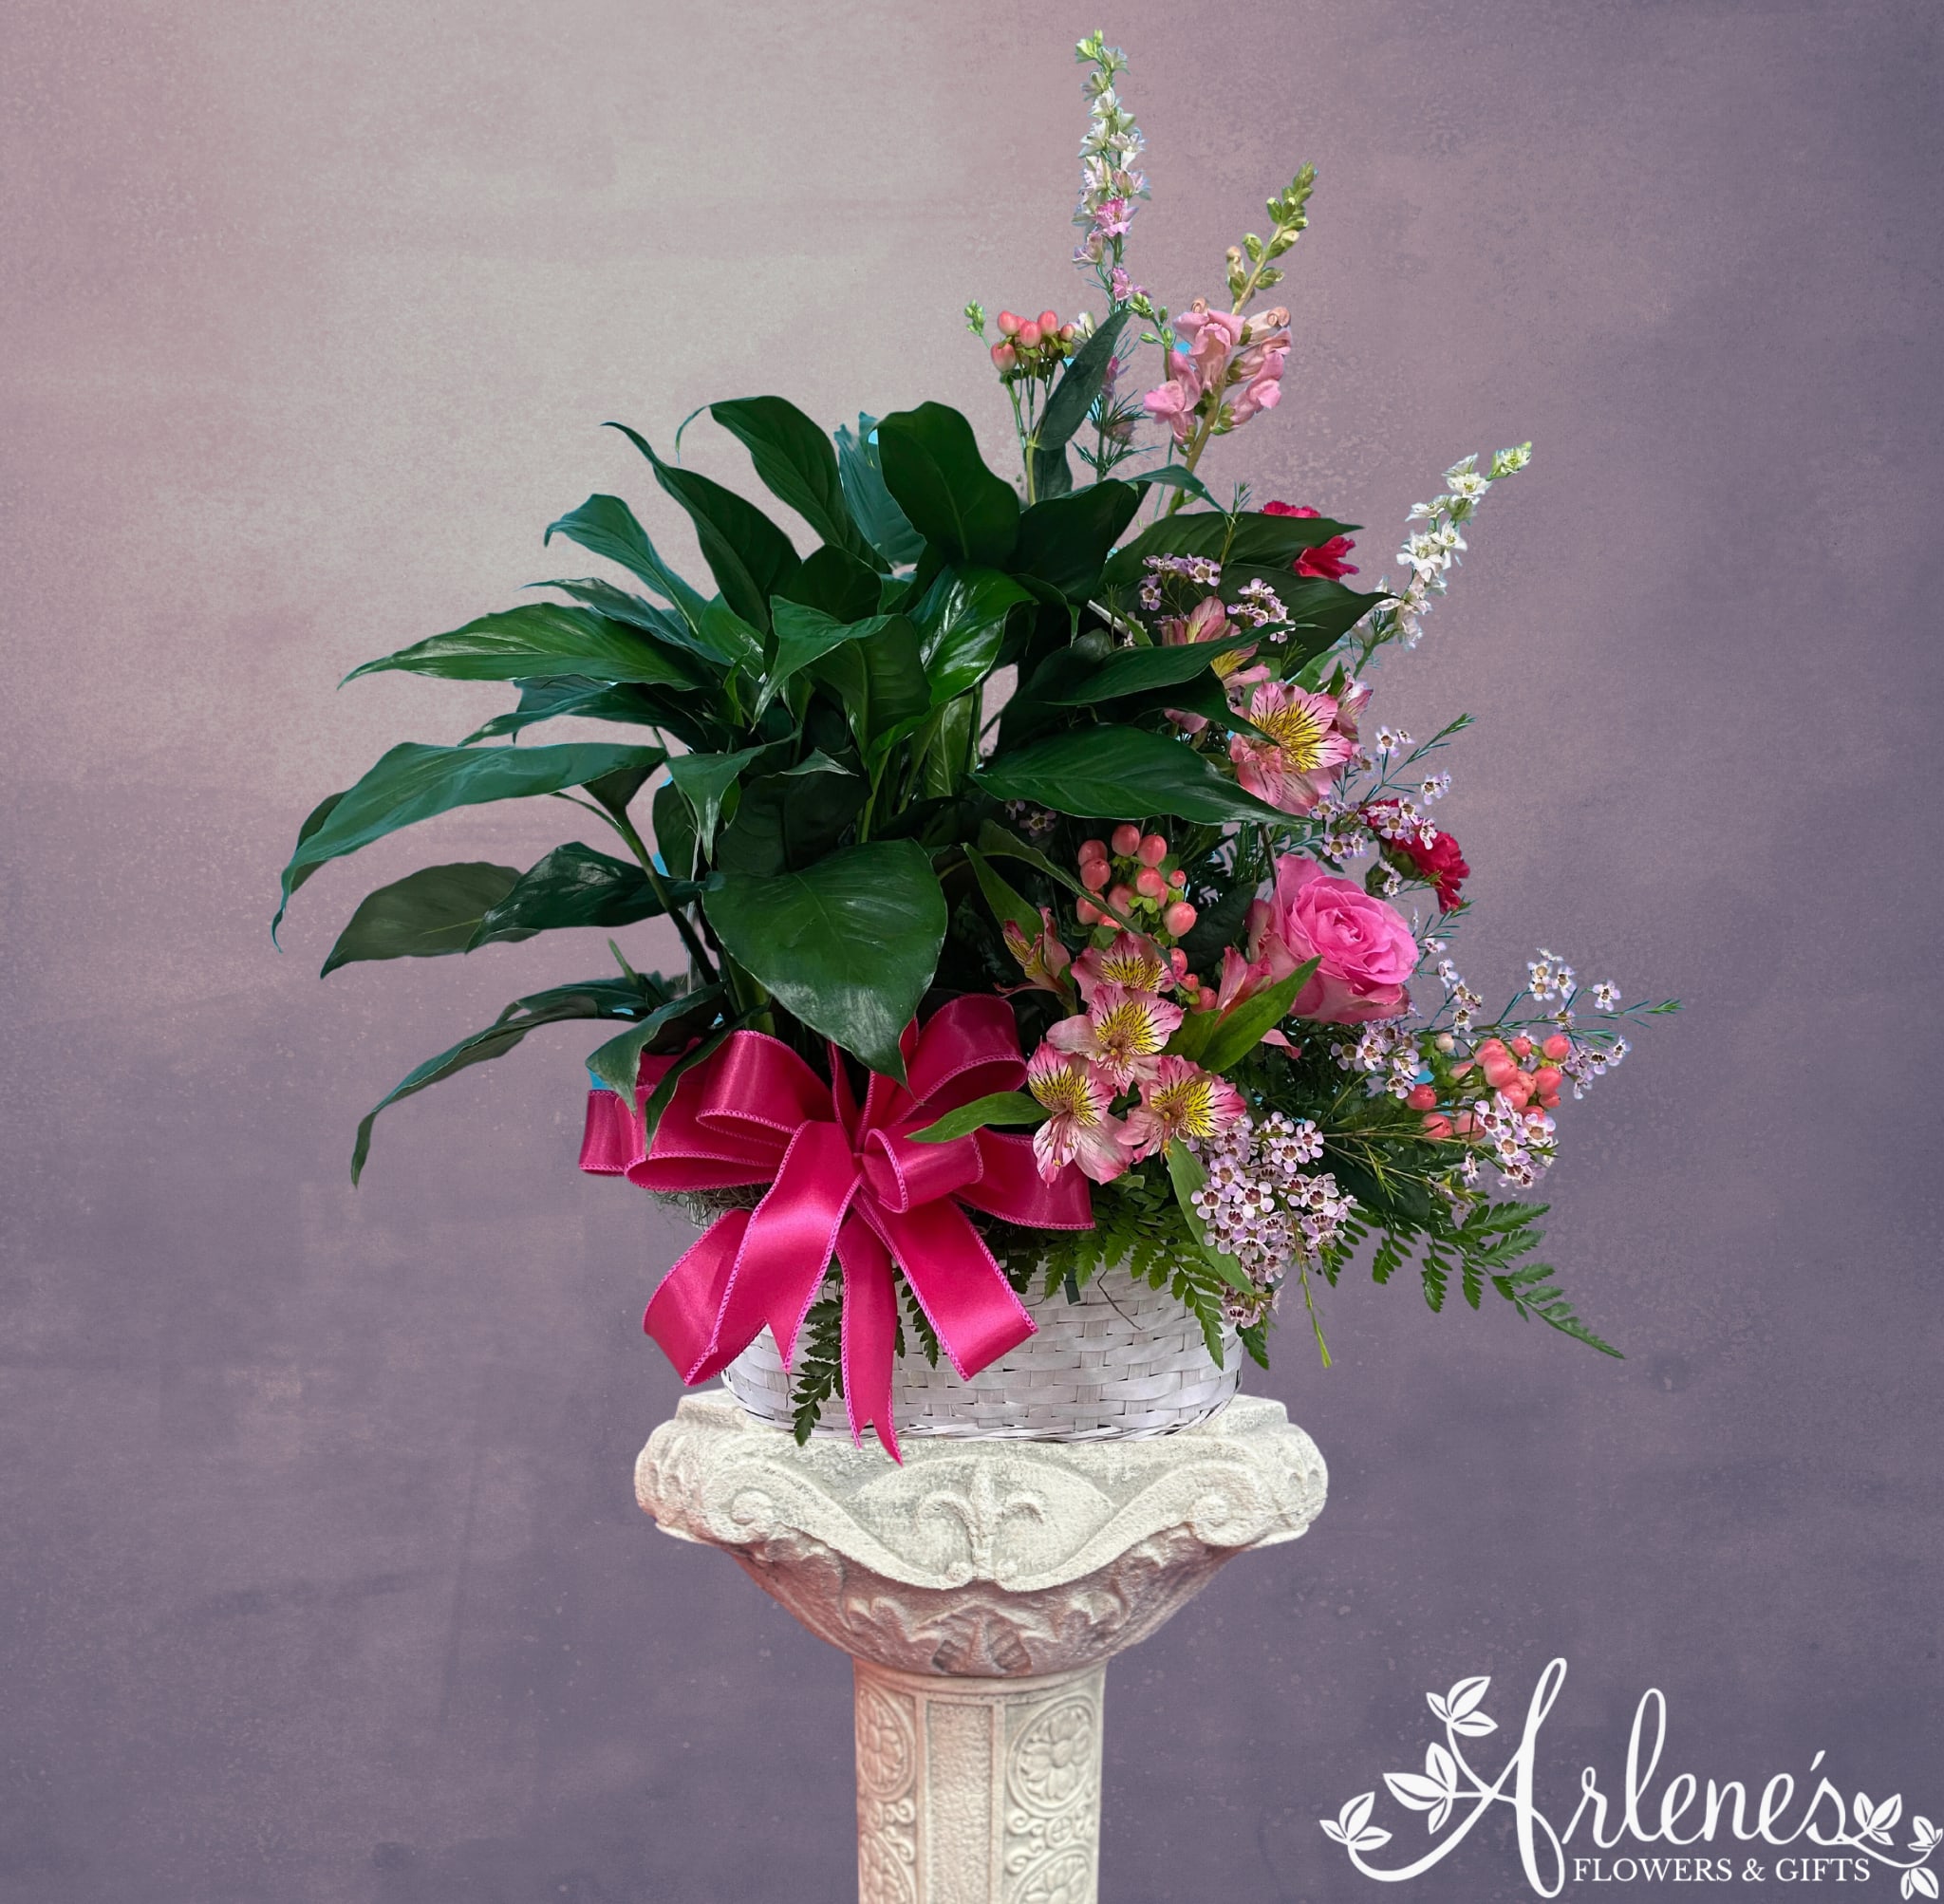 Designer's Choice Half and Half Basket - Half plant, half arrangement, it's the best of both worlds. The flowers bring beauty and color and the plant brings stability and longevity to your gift. This will be the designer's choice of plants and flowers. Call to order if you would like specifics or to give direction on the plant, container, or flowers we choose.